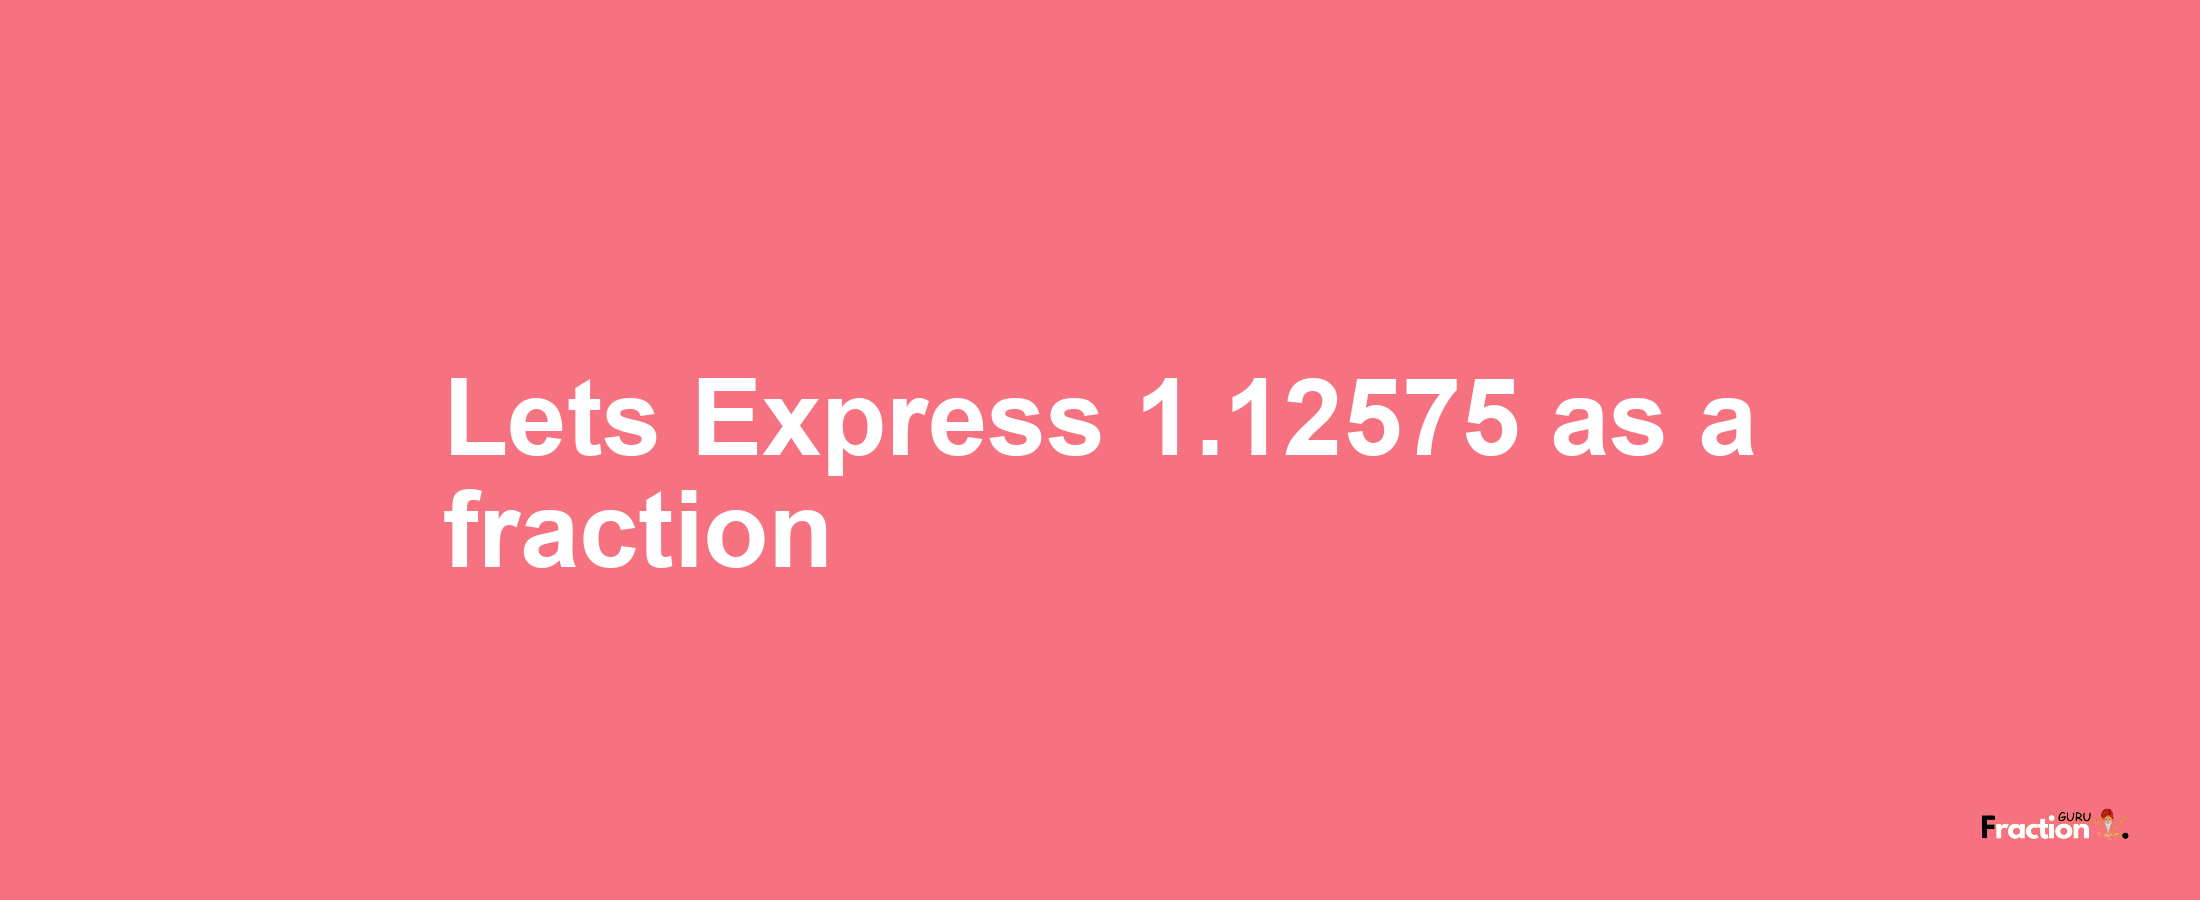 Lets Express 1.12575 as afraction